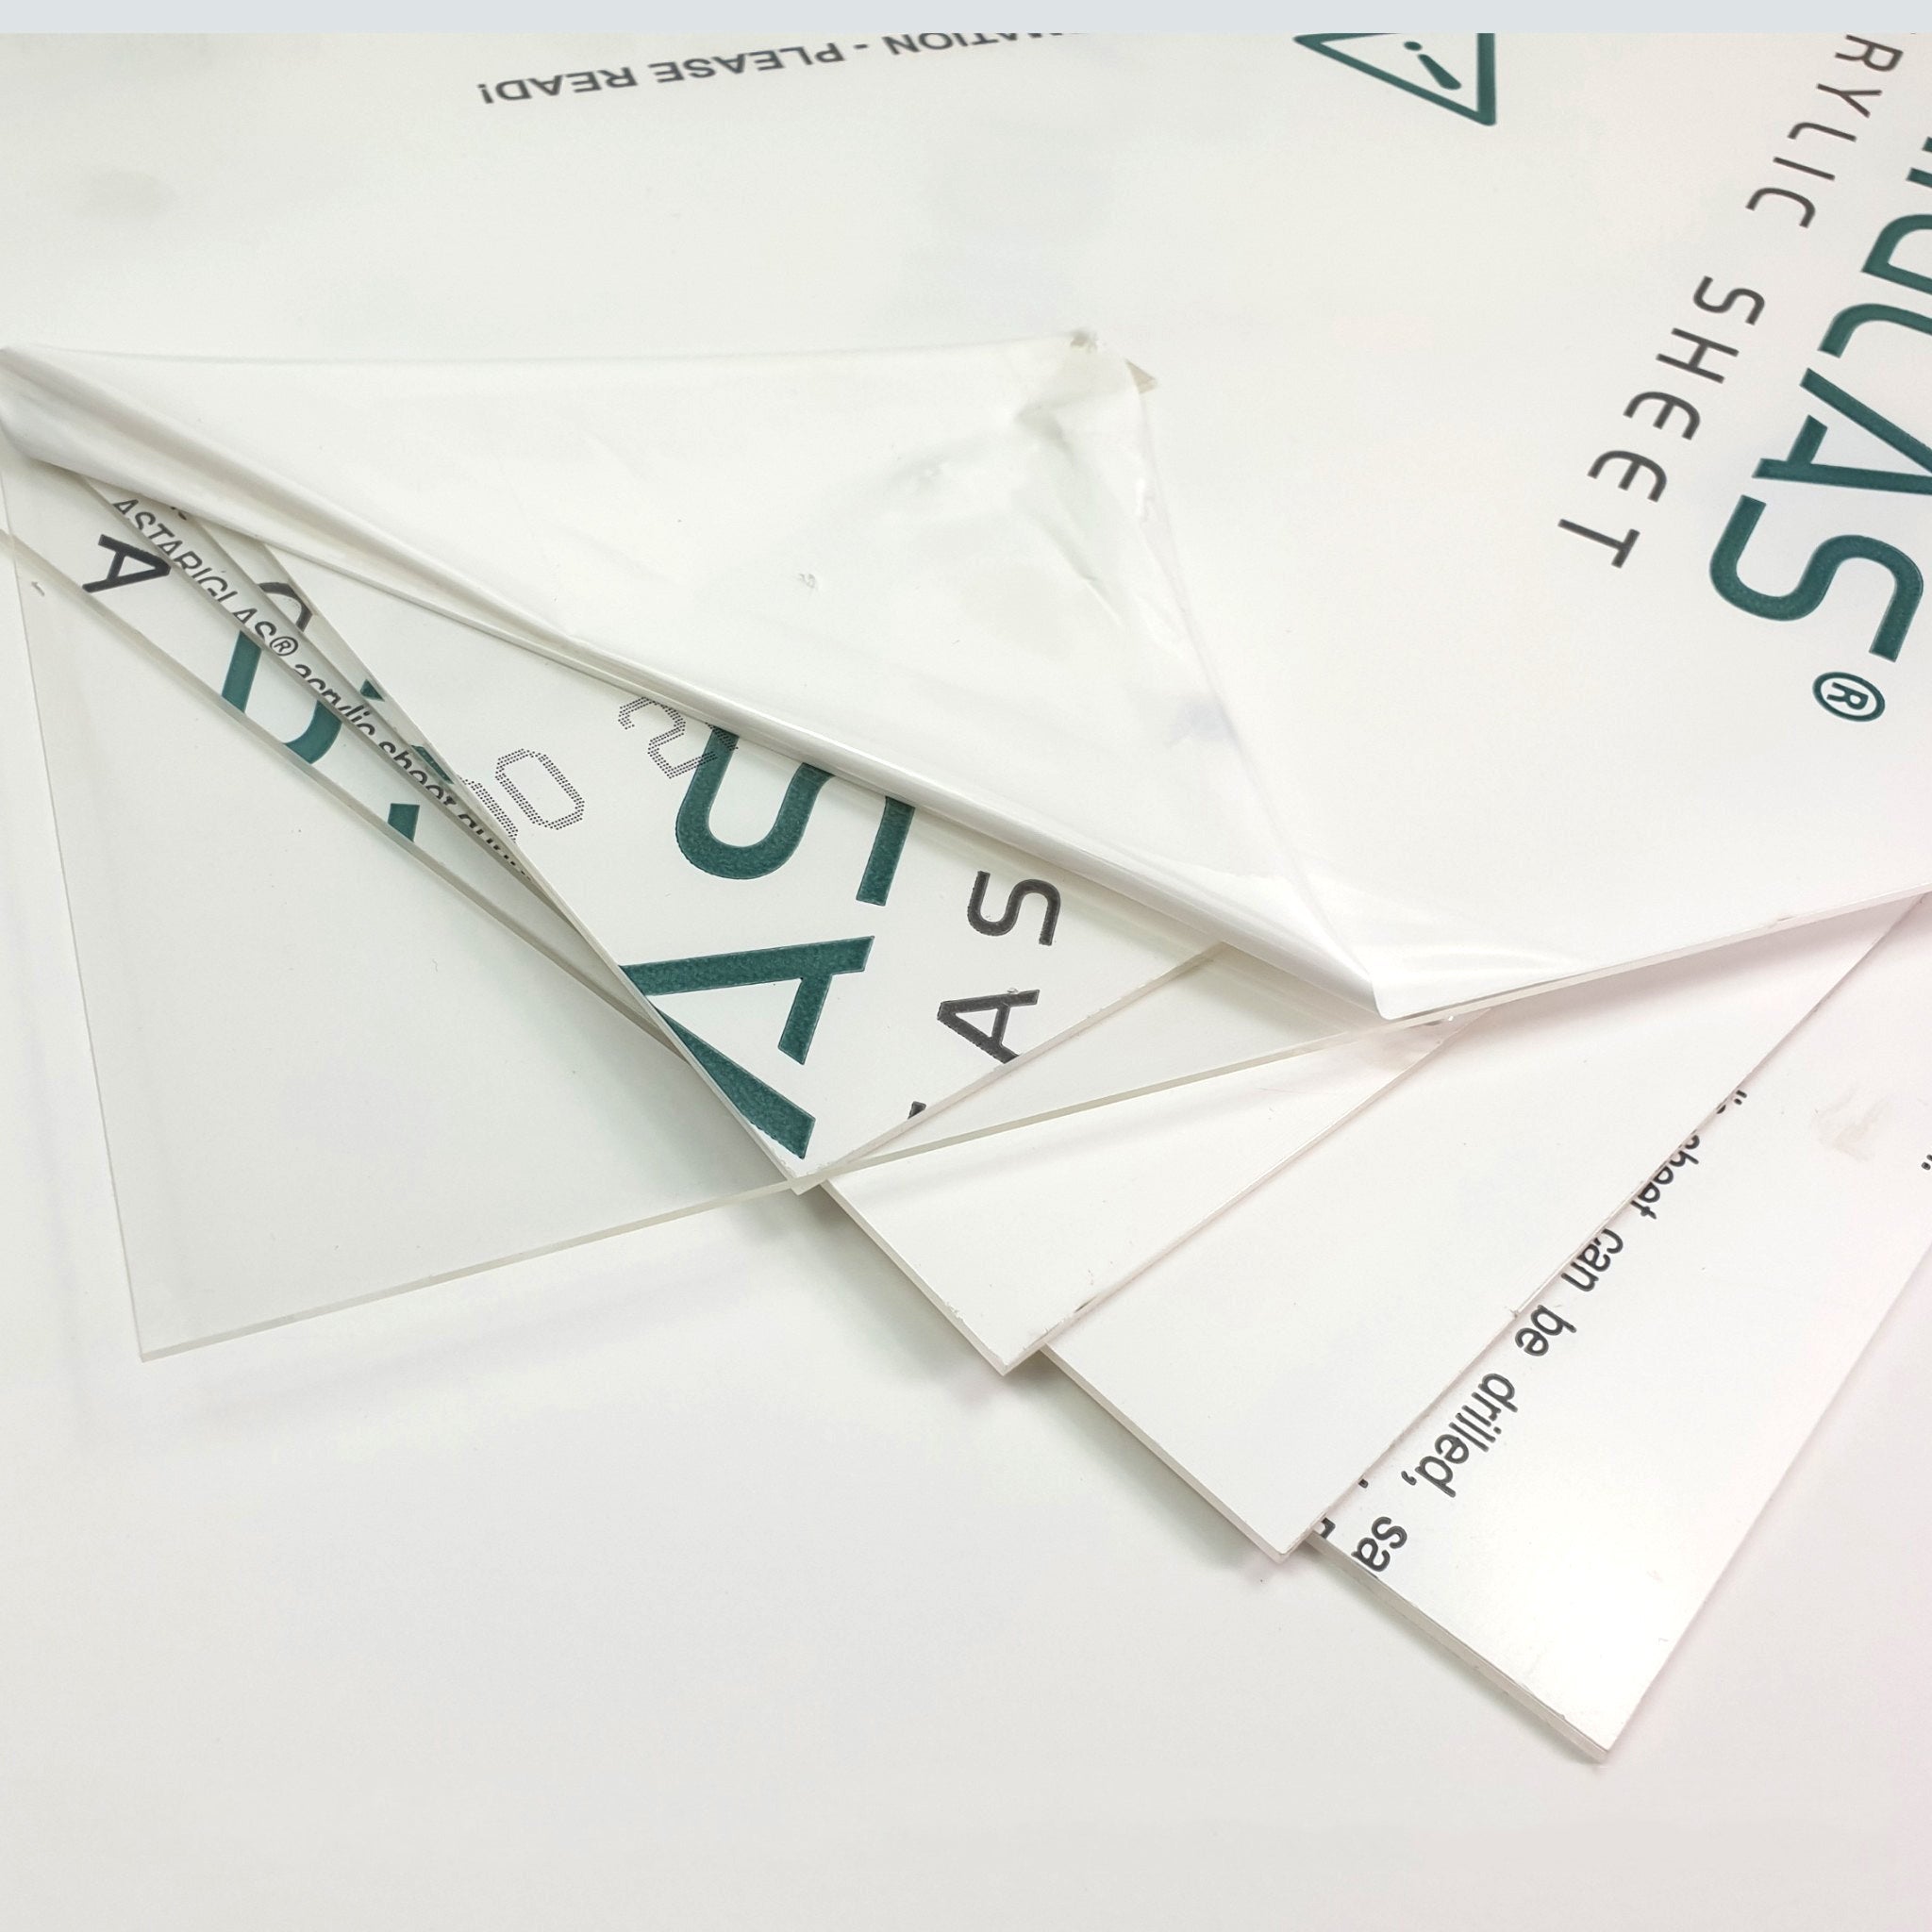 2PCS 2mm Thickness clear perspex - price for 2 sets., acrylic, 8x10", 10x13", 11x14"